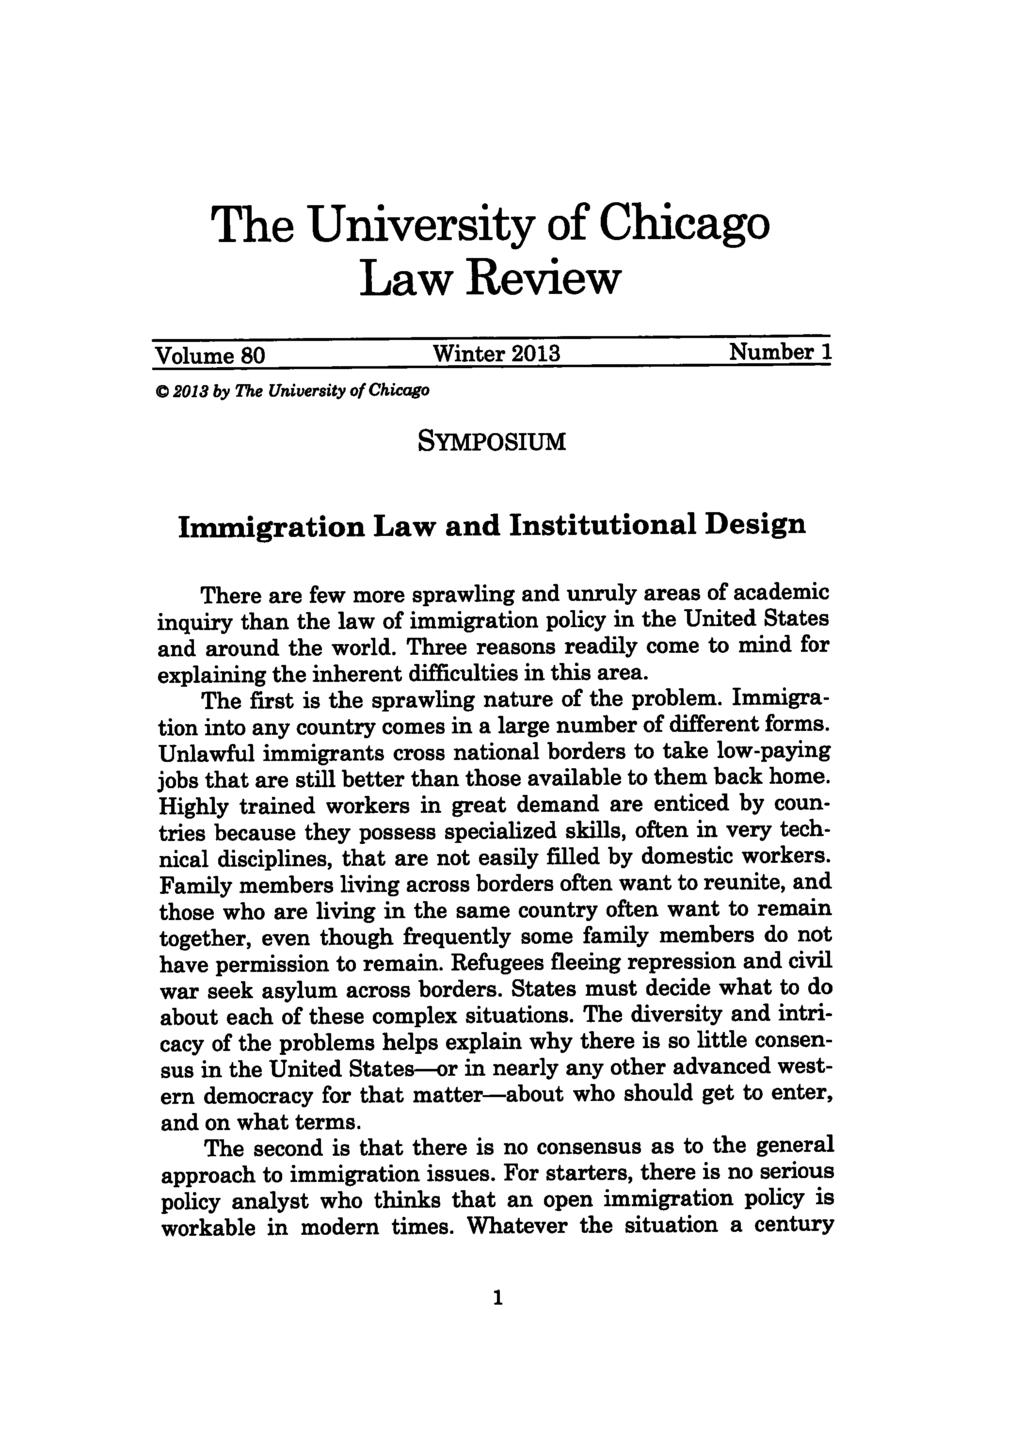 The University of Chicago Law Review Volume 80 Winter 2013 Number 1 C 2018 by The University of Chicago SYmPosIUM Immigration Law and Institutional Design There are few more sprawling and unruly